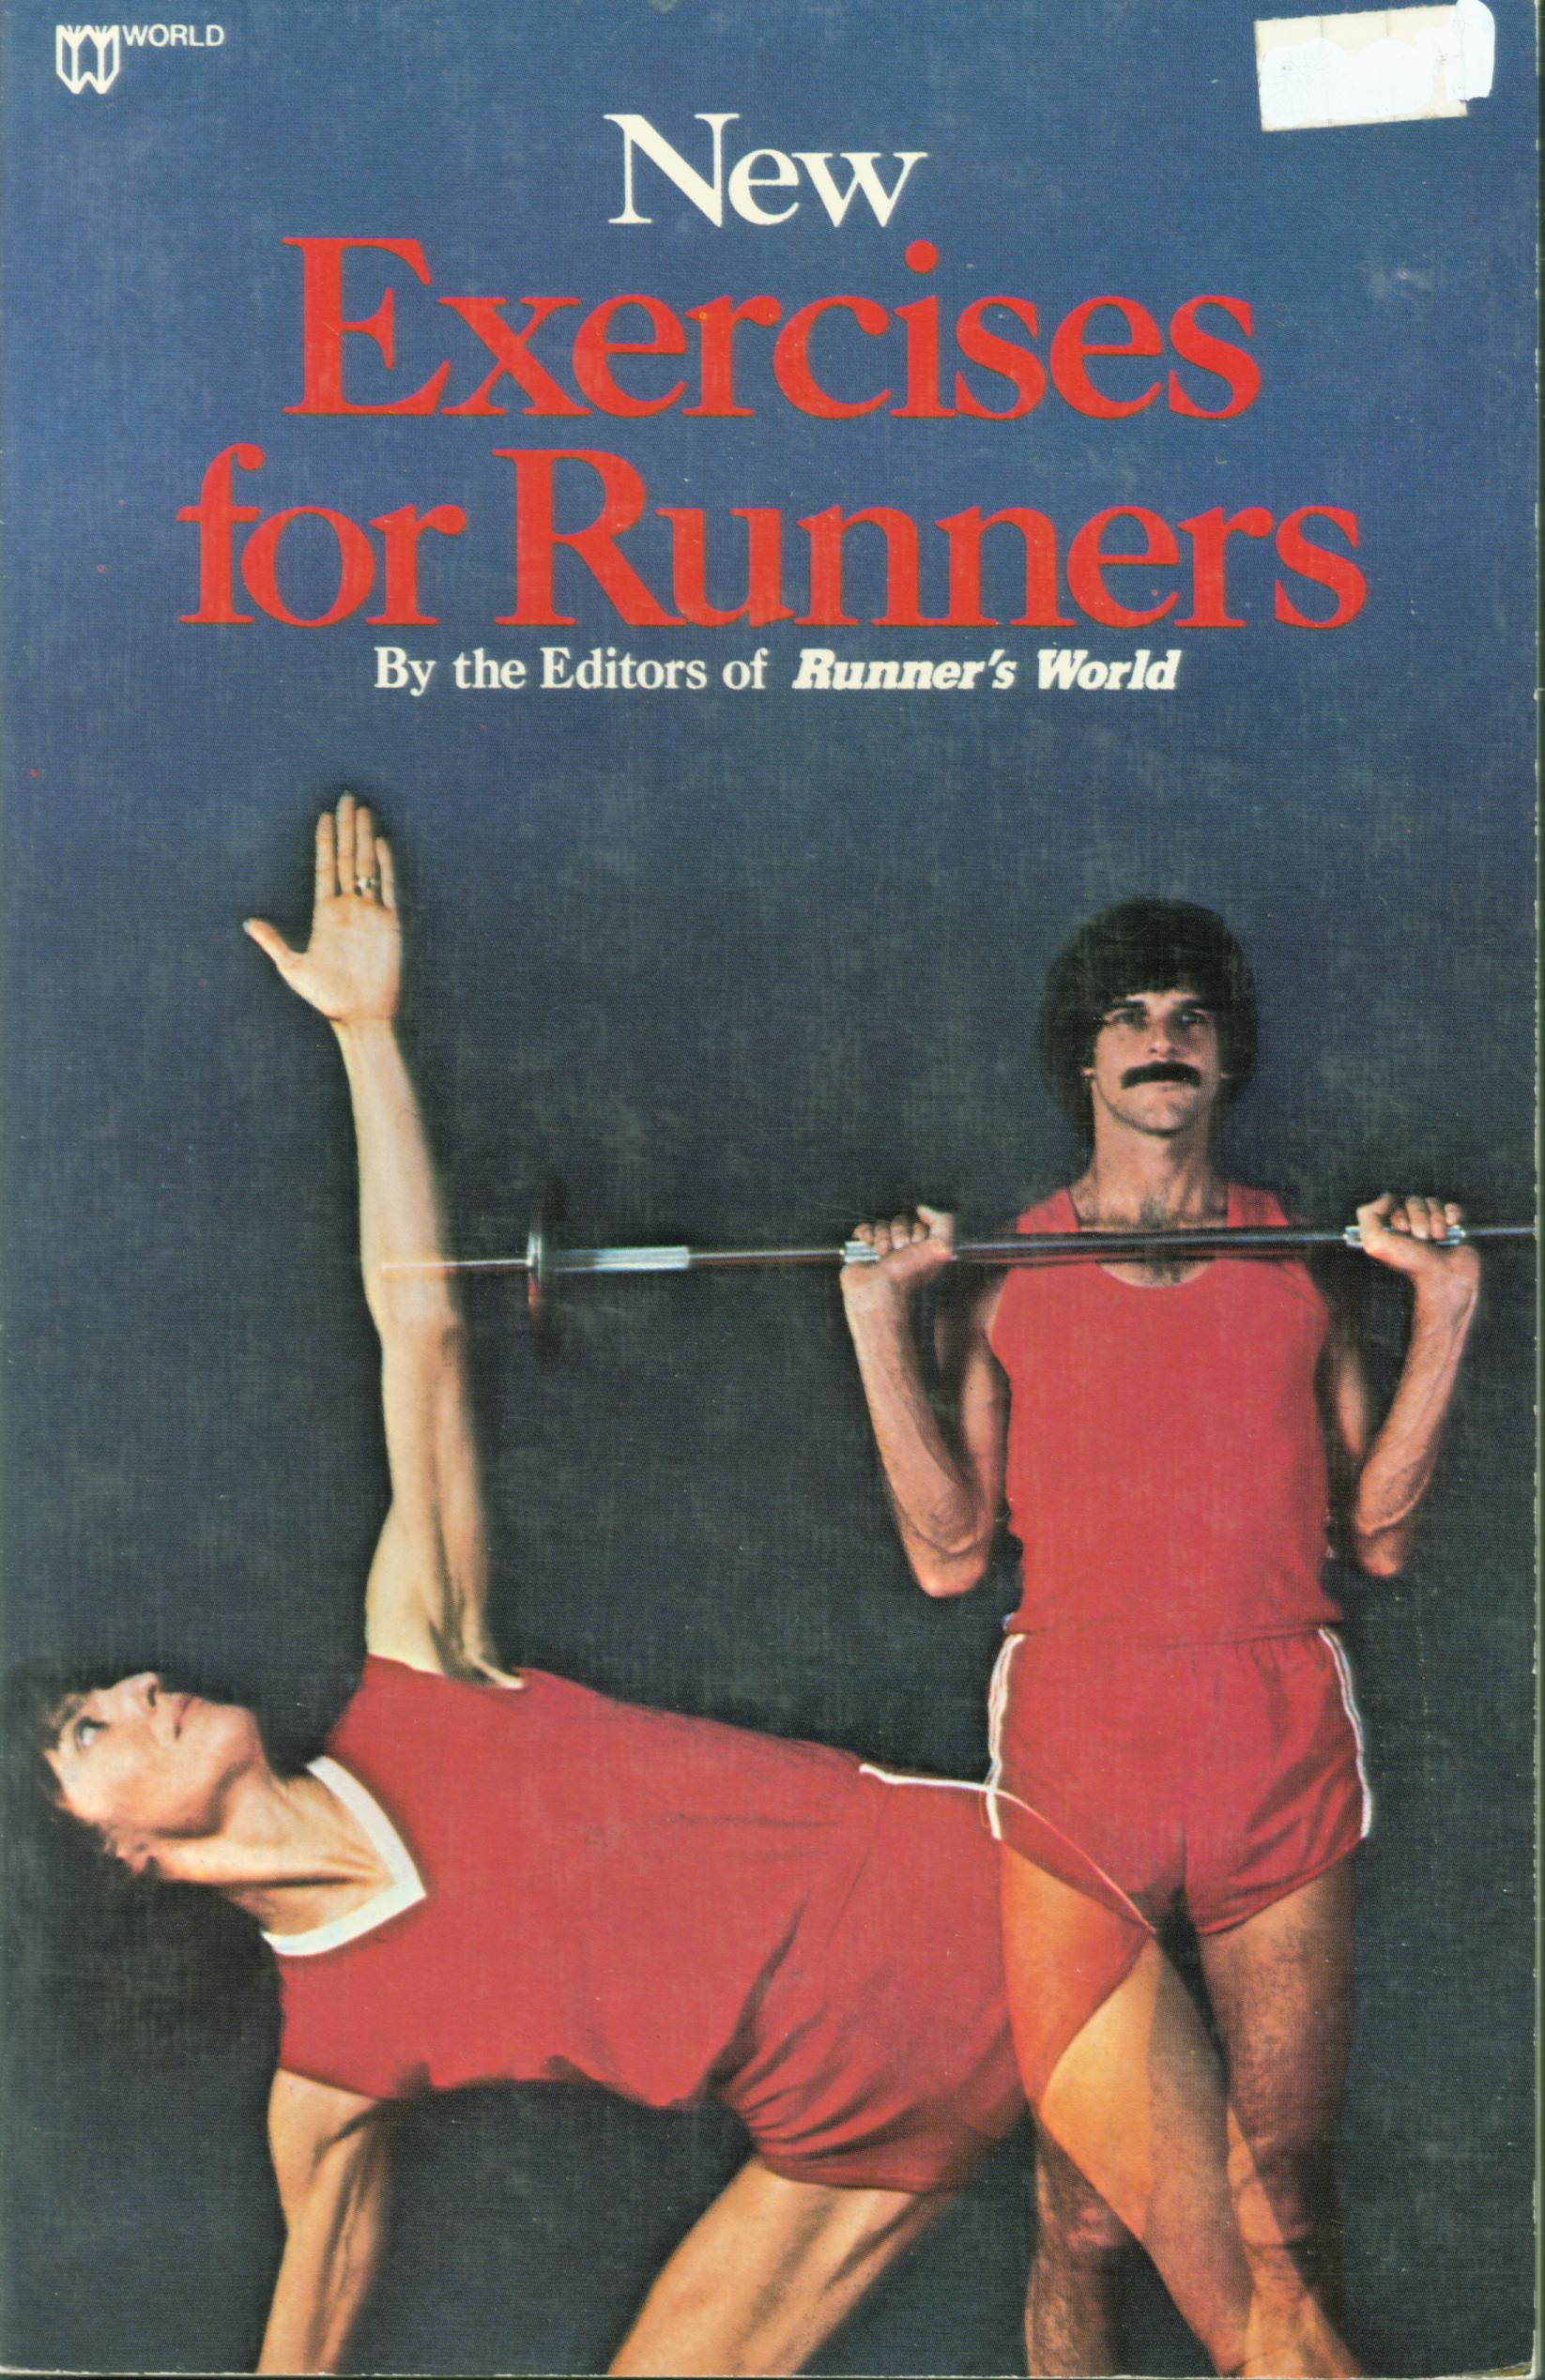 NEW EXERCISES FOR RUNNERS. 